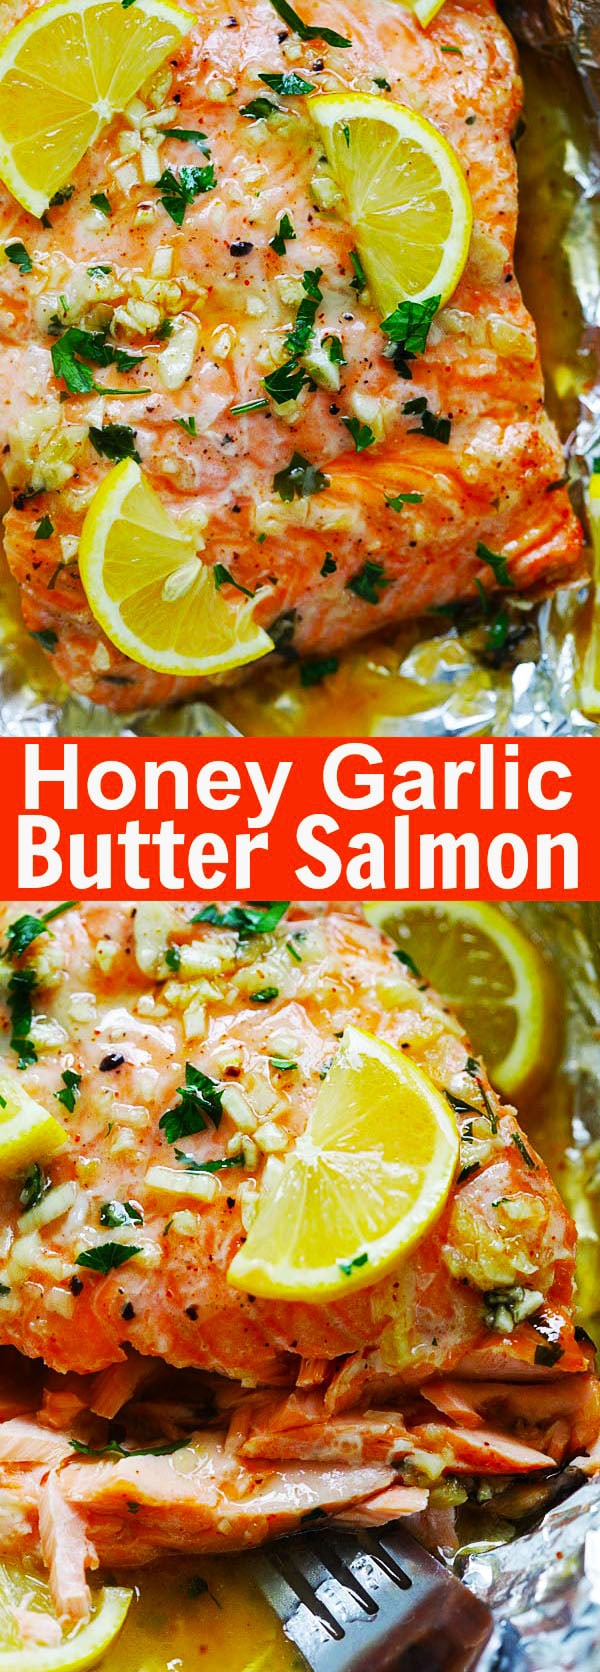 Honey Garlic Butter Salmon - easy and quick baked salmon dinner that takes only 10 minutes active time and 15 minutes in the oven. Foil-wrapped baking means there is no dish to wash | rasamalaysia.com